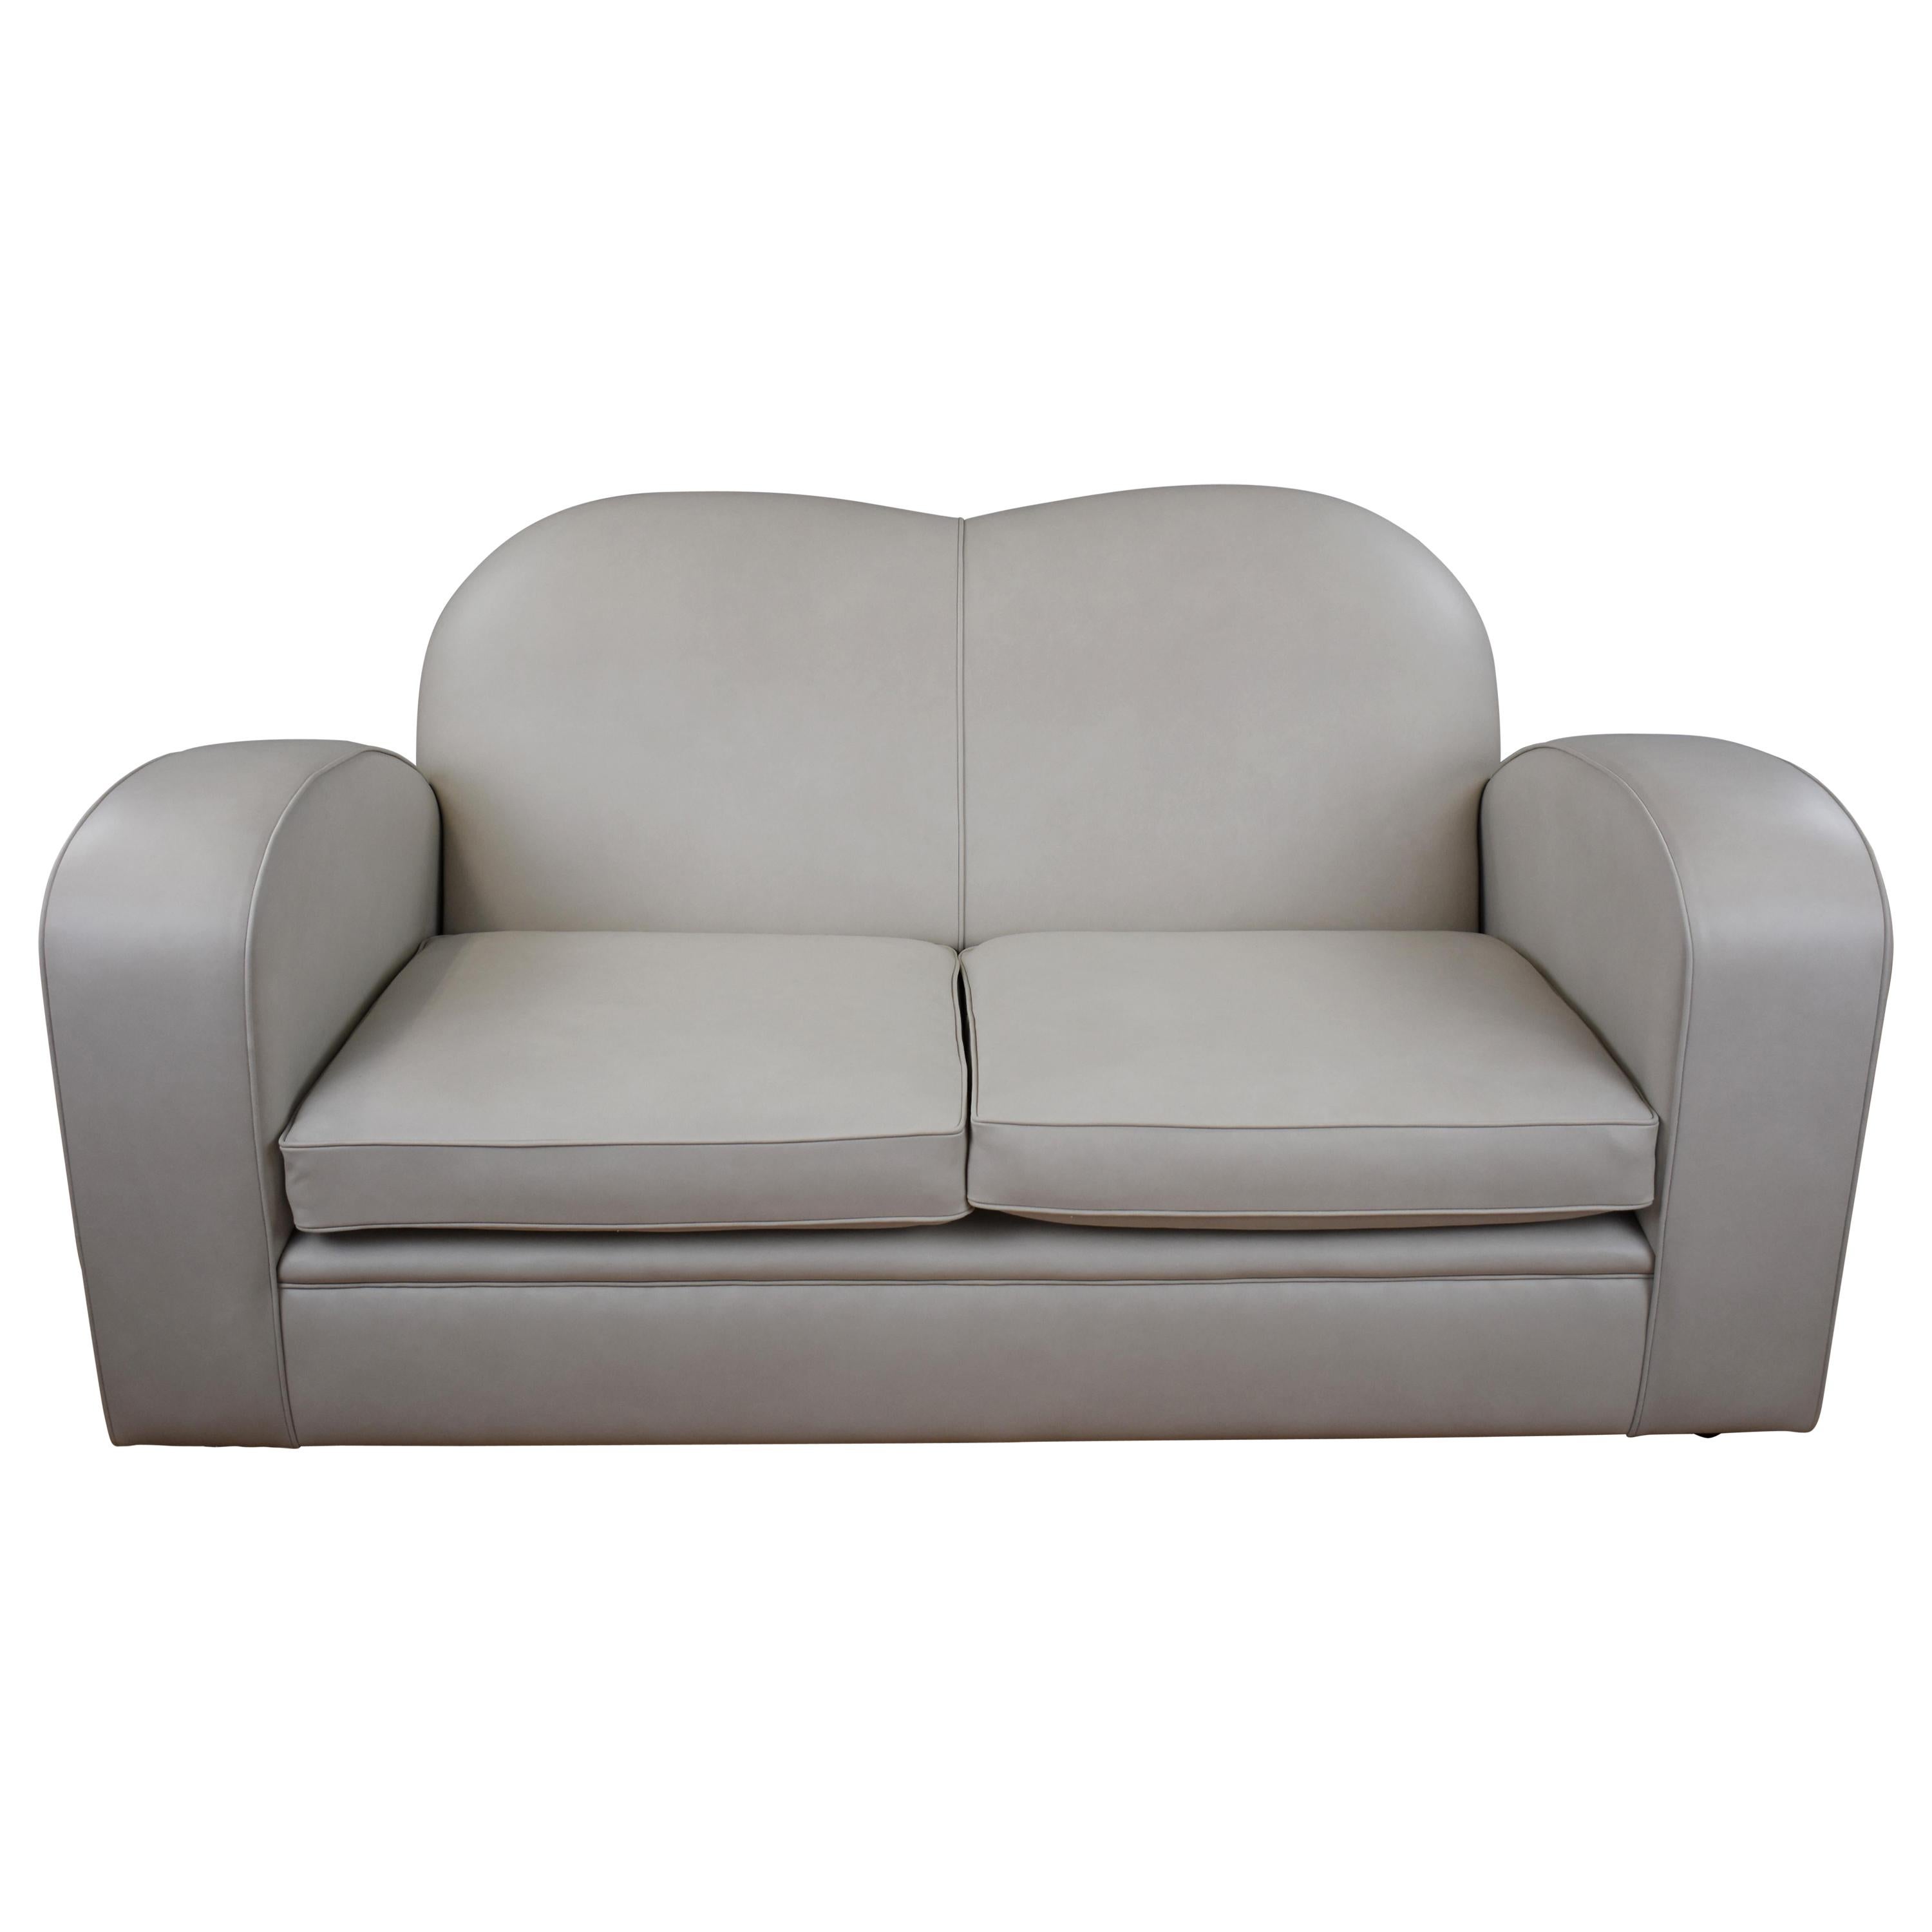 Art Deco Style Leather Two-Seat Sofa